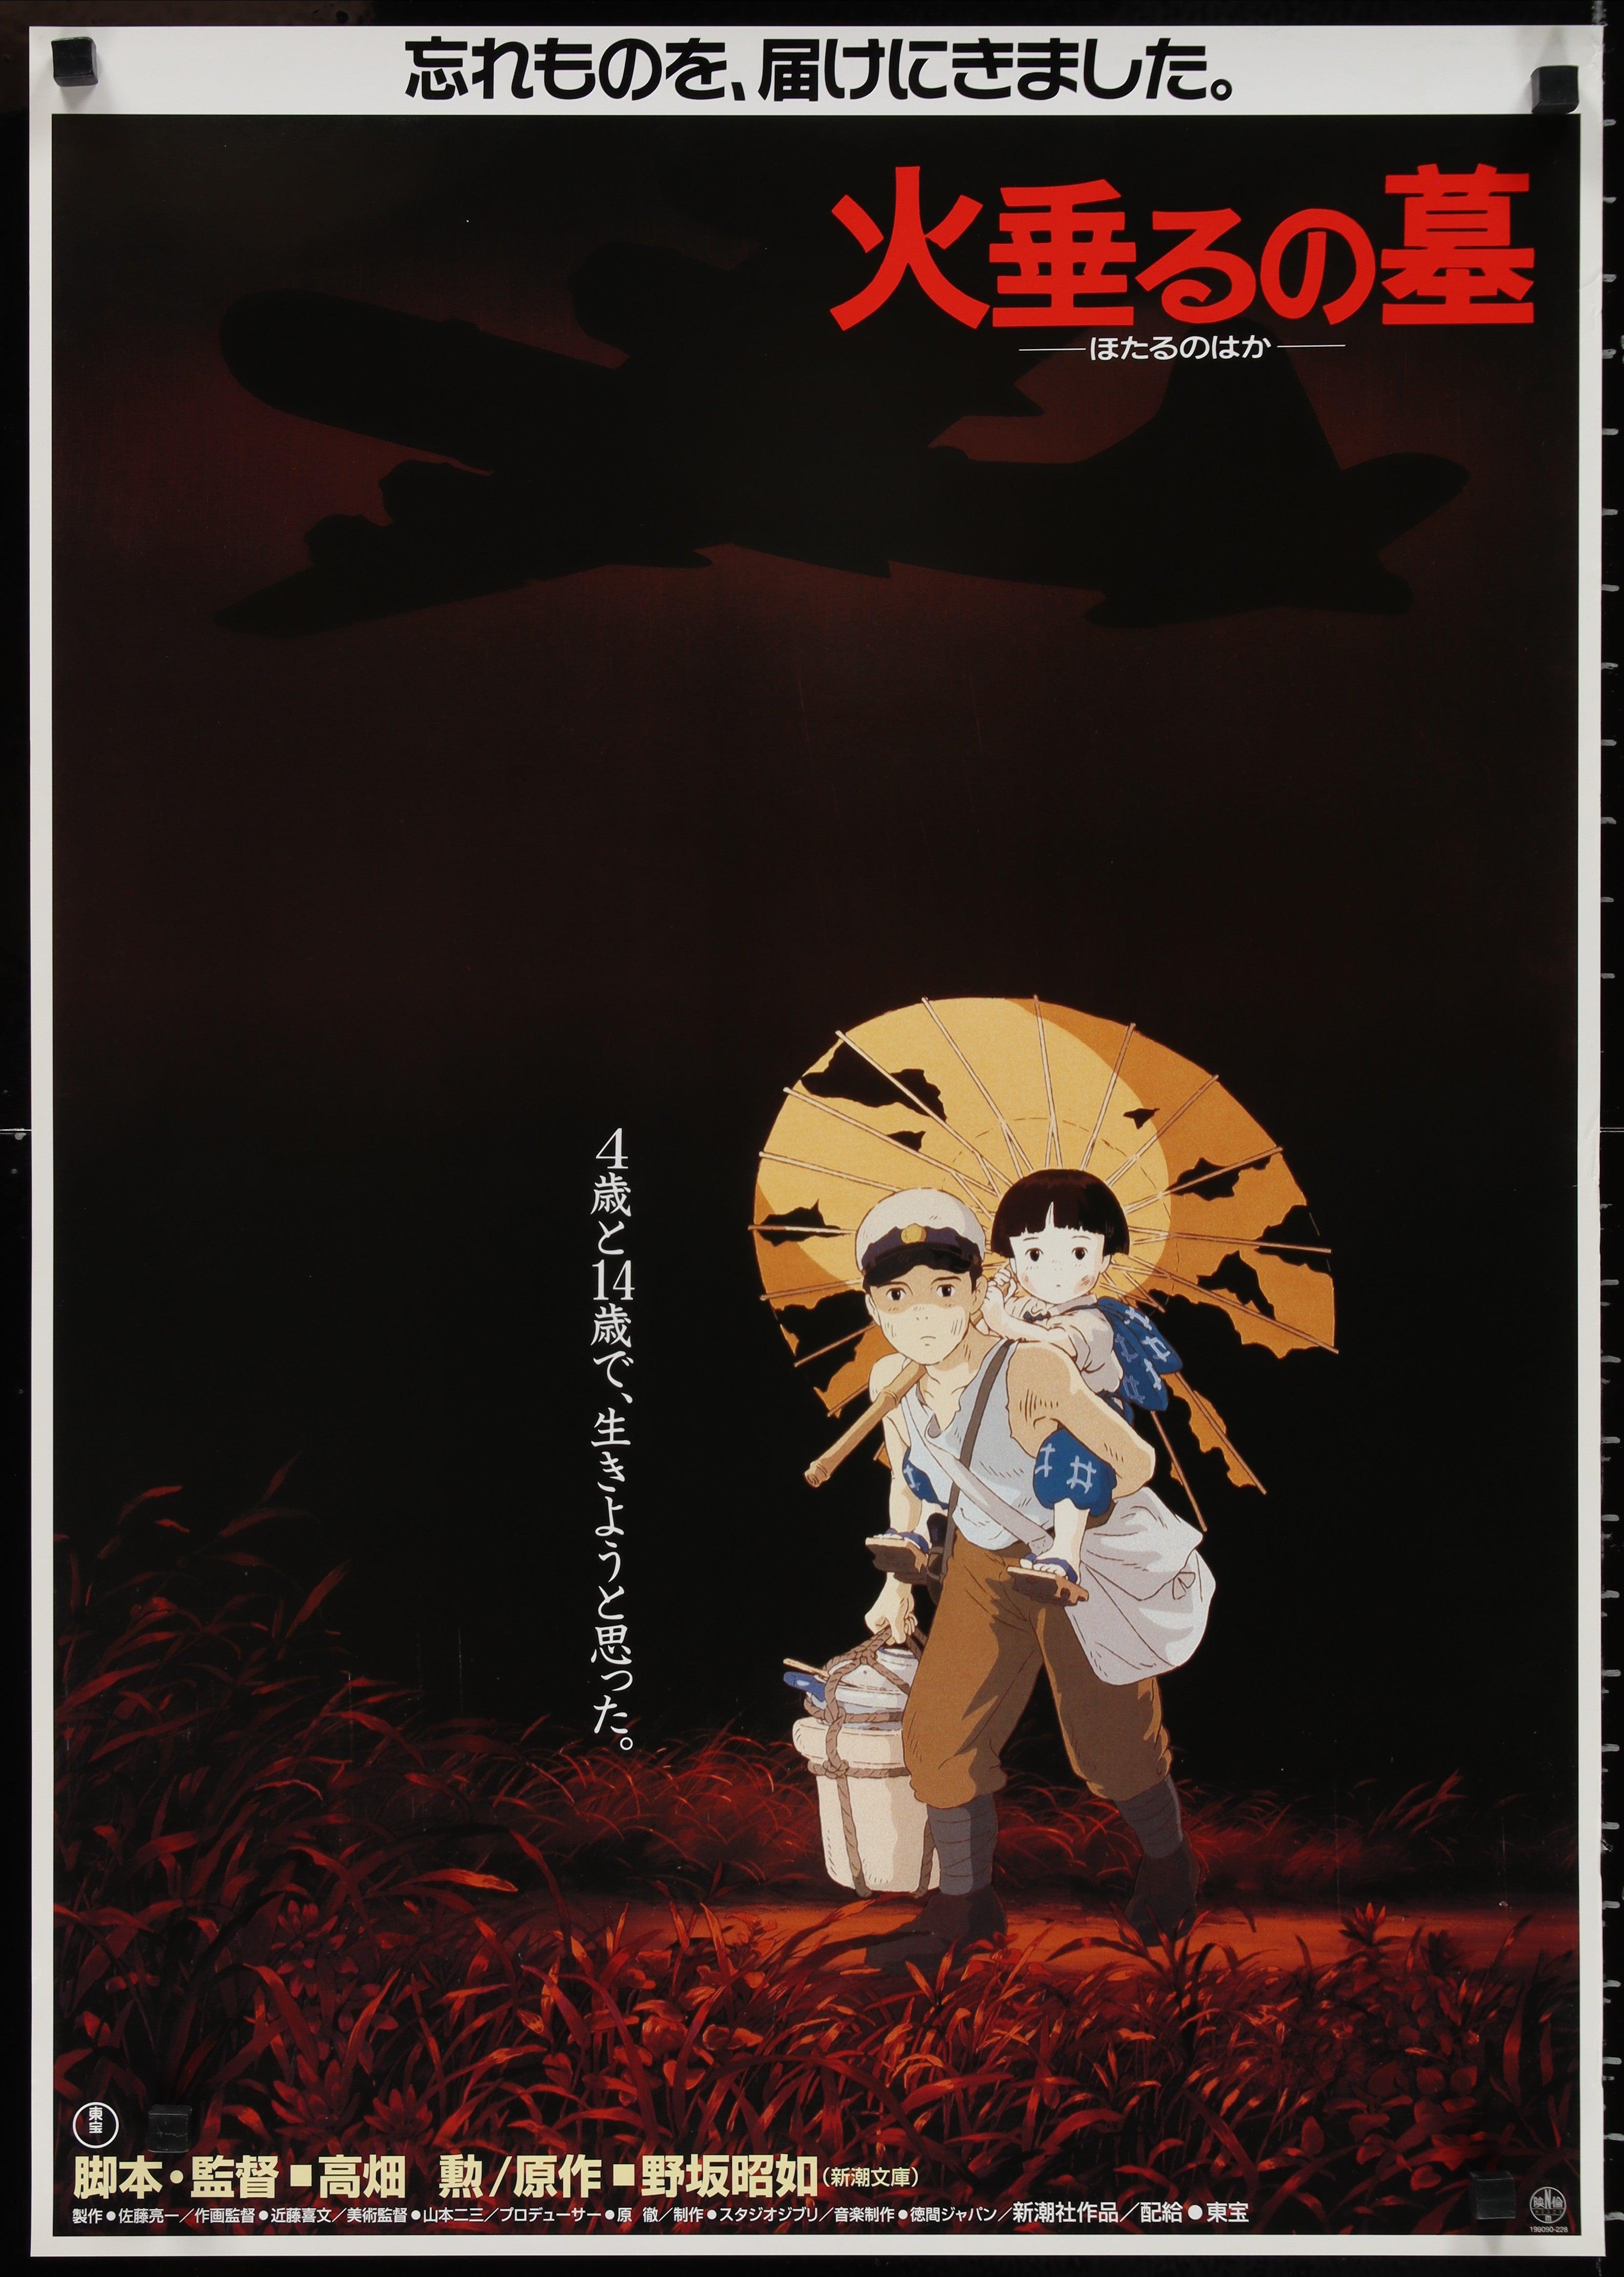 Grave Of The Fireflies - Studio Ghibli - Japanaese Animated Movie Graphic  Poster - Art Prints